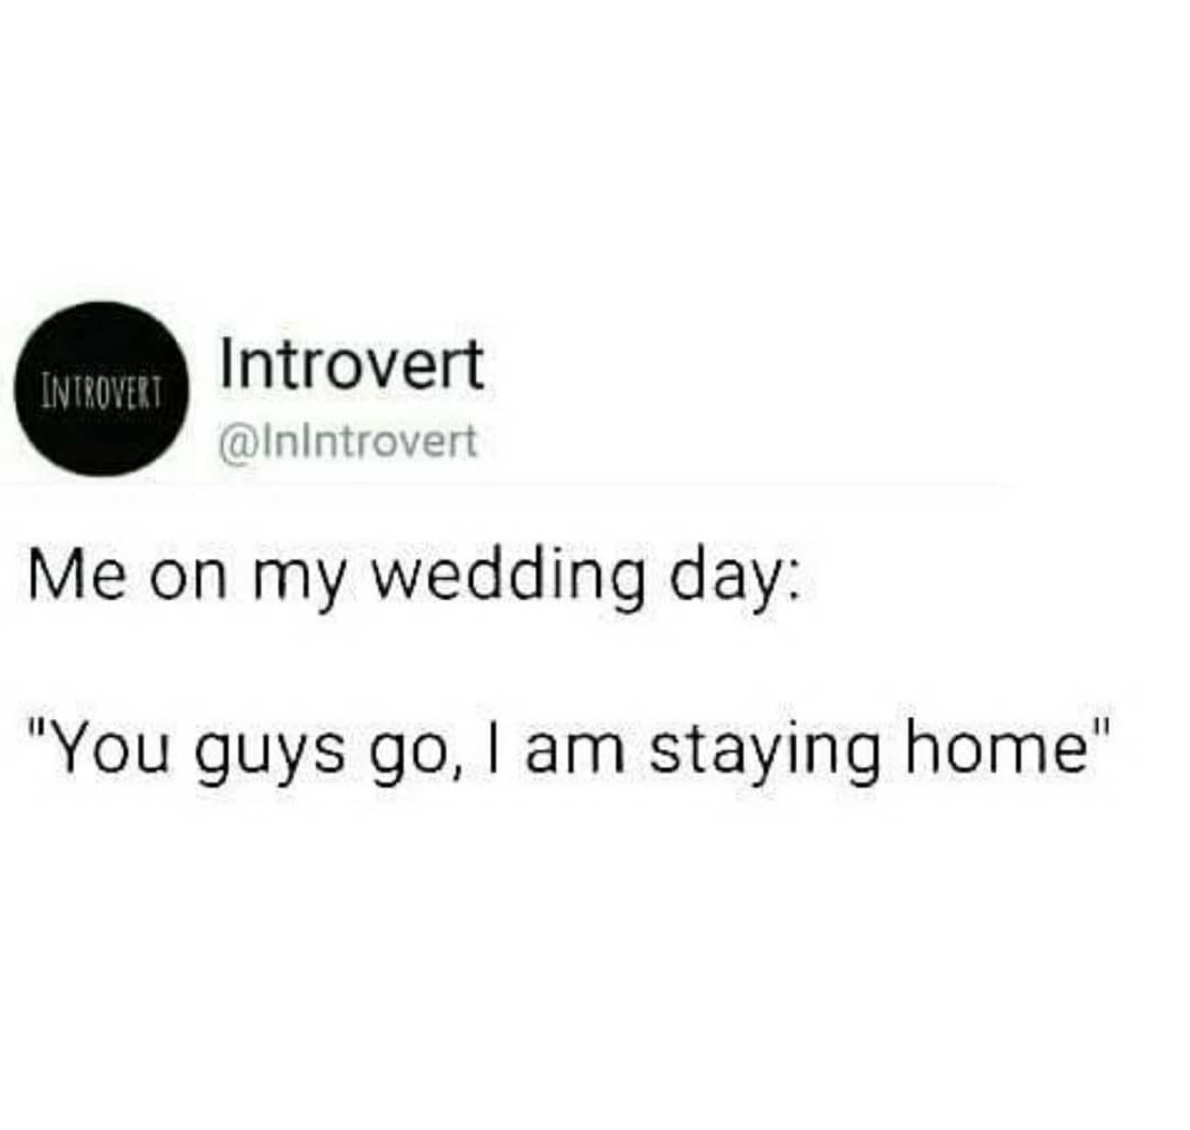 introvert wedding meme - Introvert Introvert Me on my wedding day "You guys go, I am staying home"